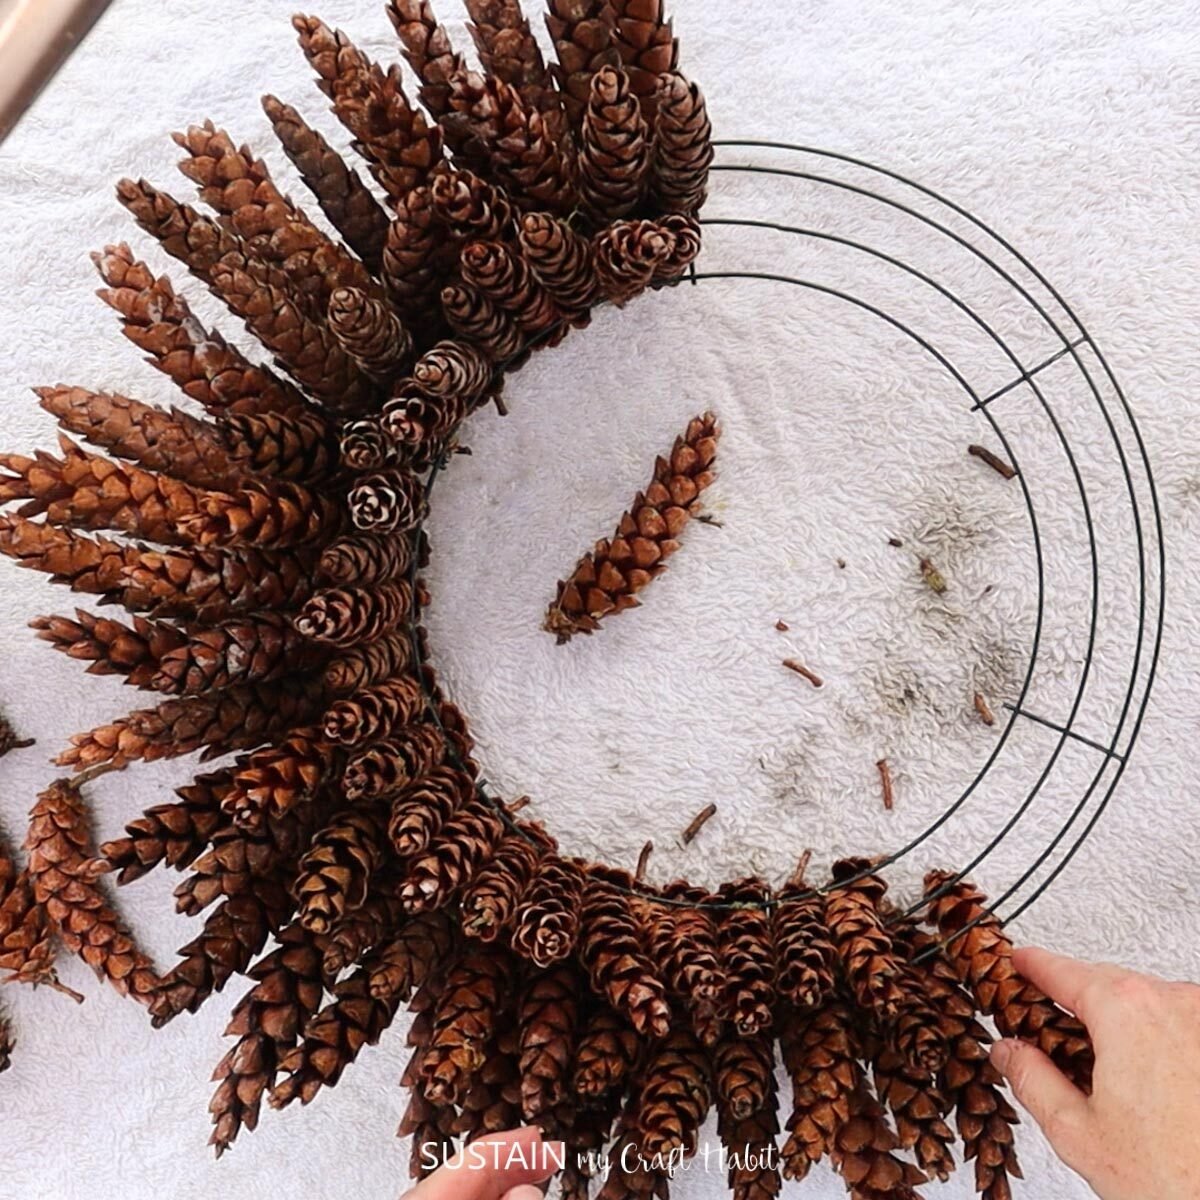 Continuing to make a pinecone wreath.